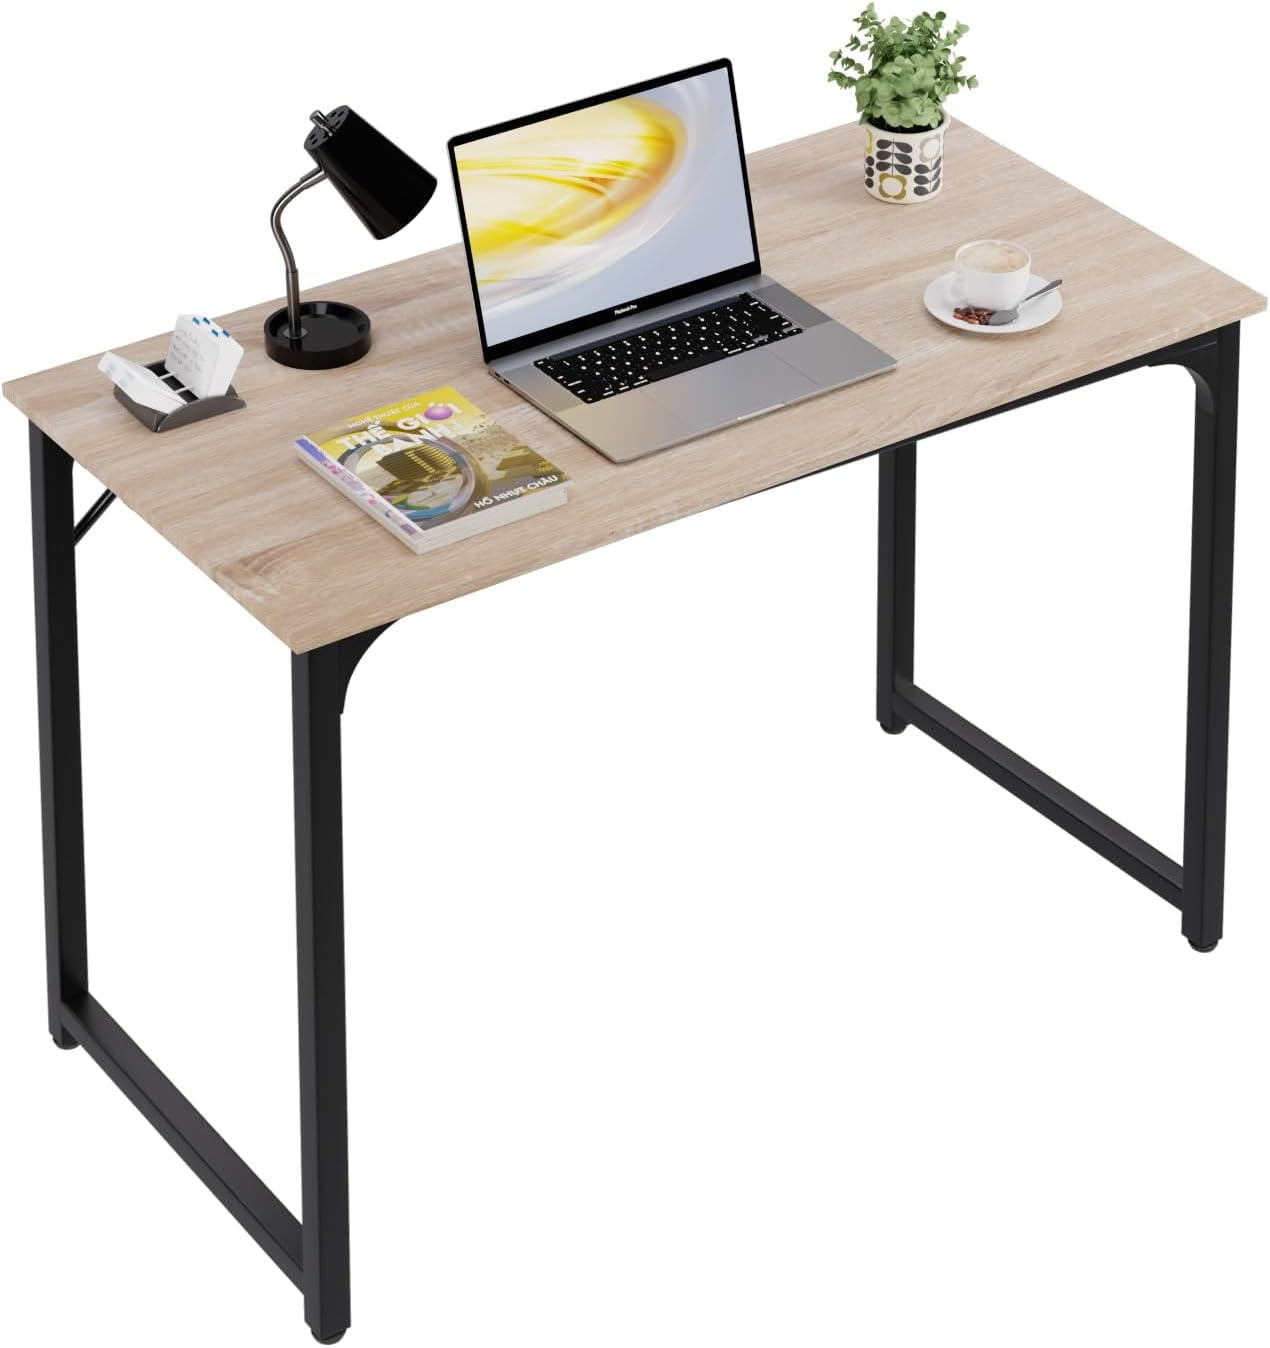 PayLessHere 39 inch Computer Desk Modern Writing Desk, Simple Study Table, Industrial Office Desk, Sturdy Laptop Table for Home Office, Nature - Walmart.com